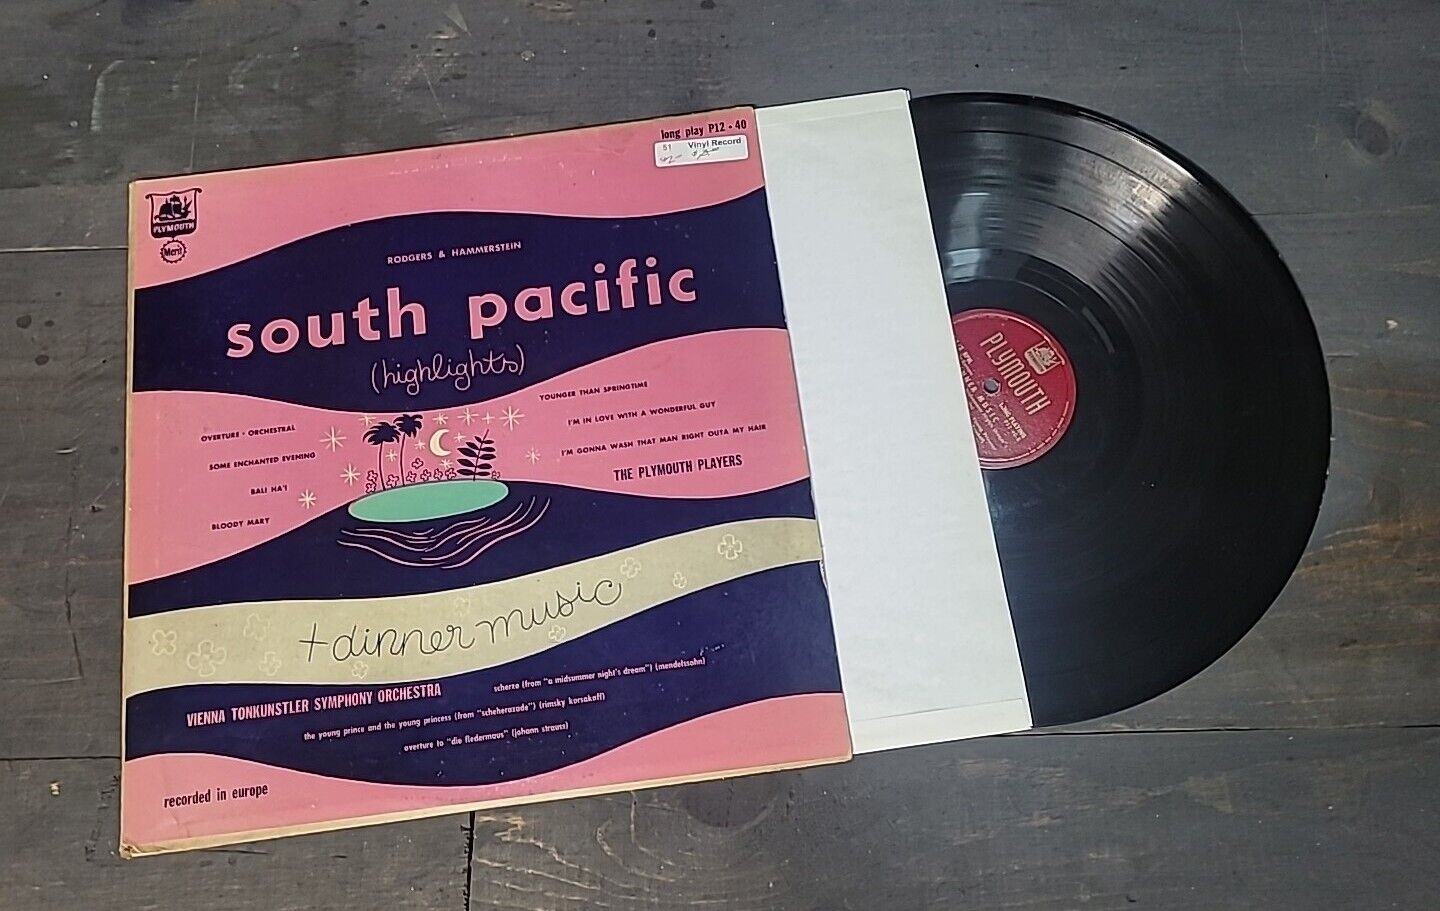 South Pacific highlights + dinner music Plymouth Hi-Fi P12-40 LP 33RPM VINTAGE 